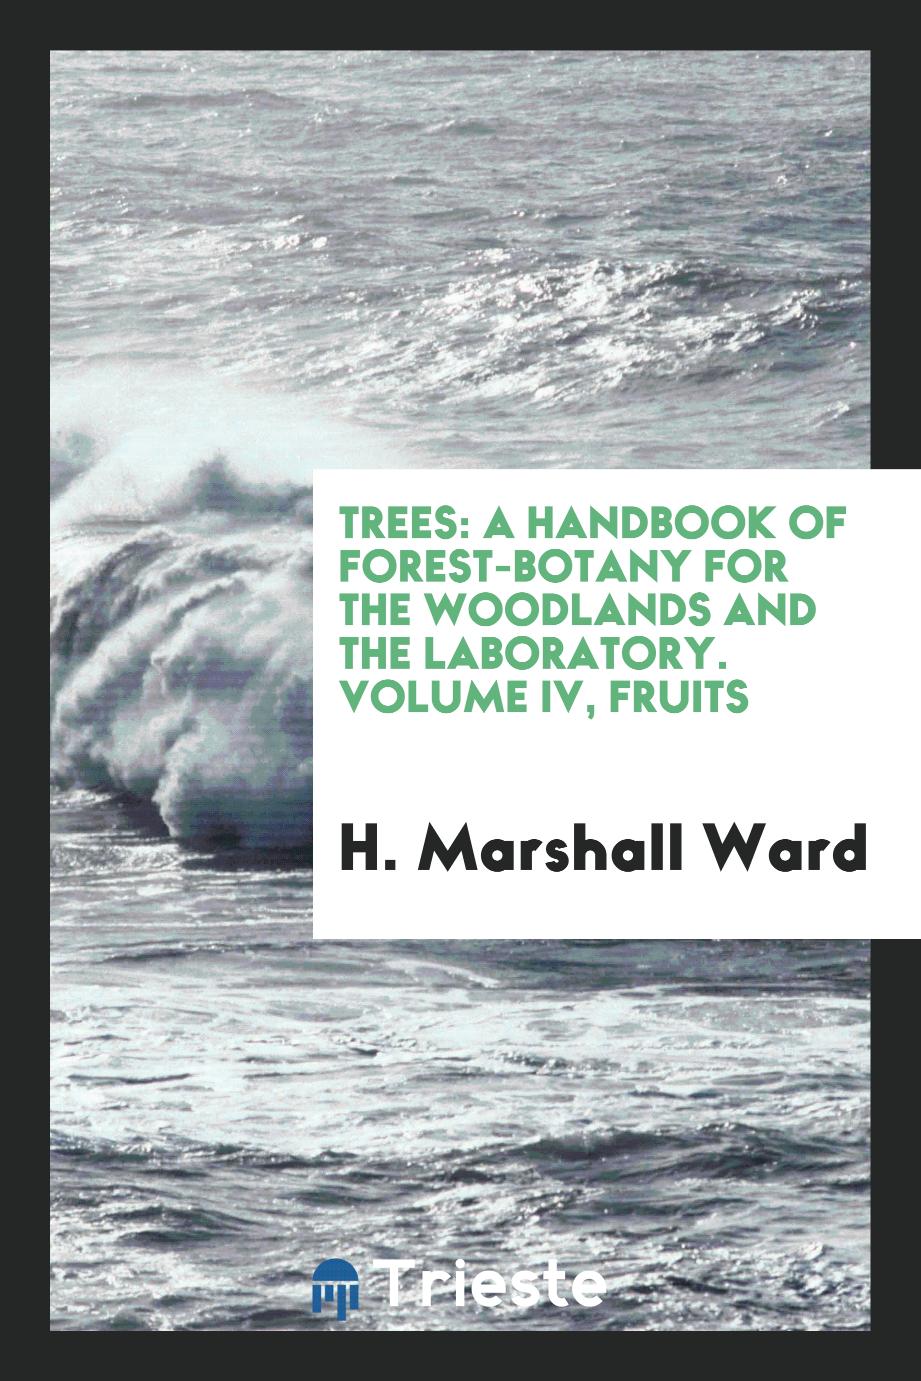 Trees: A Handbook of Forest-botany for the Woodlands and the Laboratory. Volume IV, Fruits